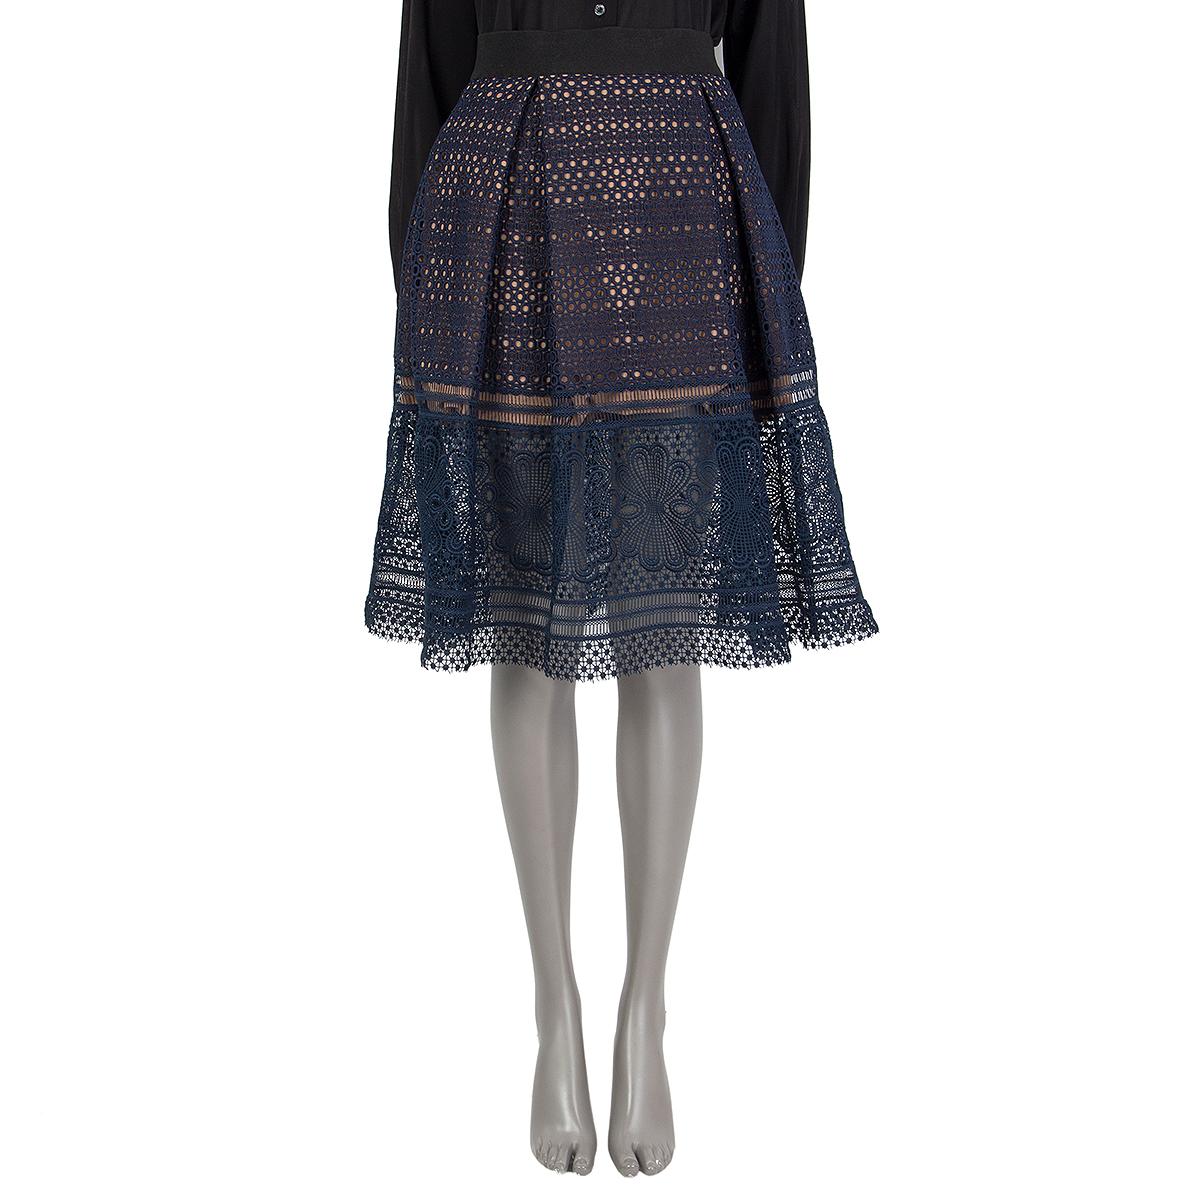 100% authentic Self-Portrait crochet skirt in midnight blue polyester (98%) and cotton (2%) with pockets. Has a black elastic waist. Closes on the back with a zipper. Lined in nude polyester (95%) and spandex (5%). Has been worn and is in excellent